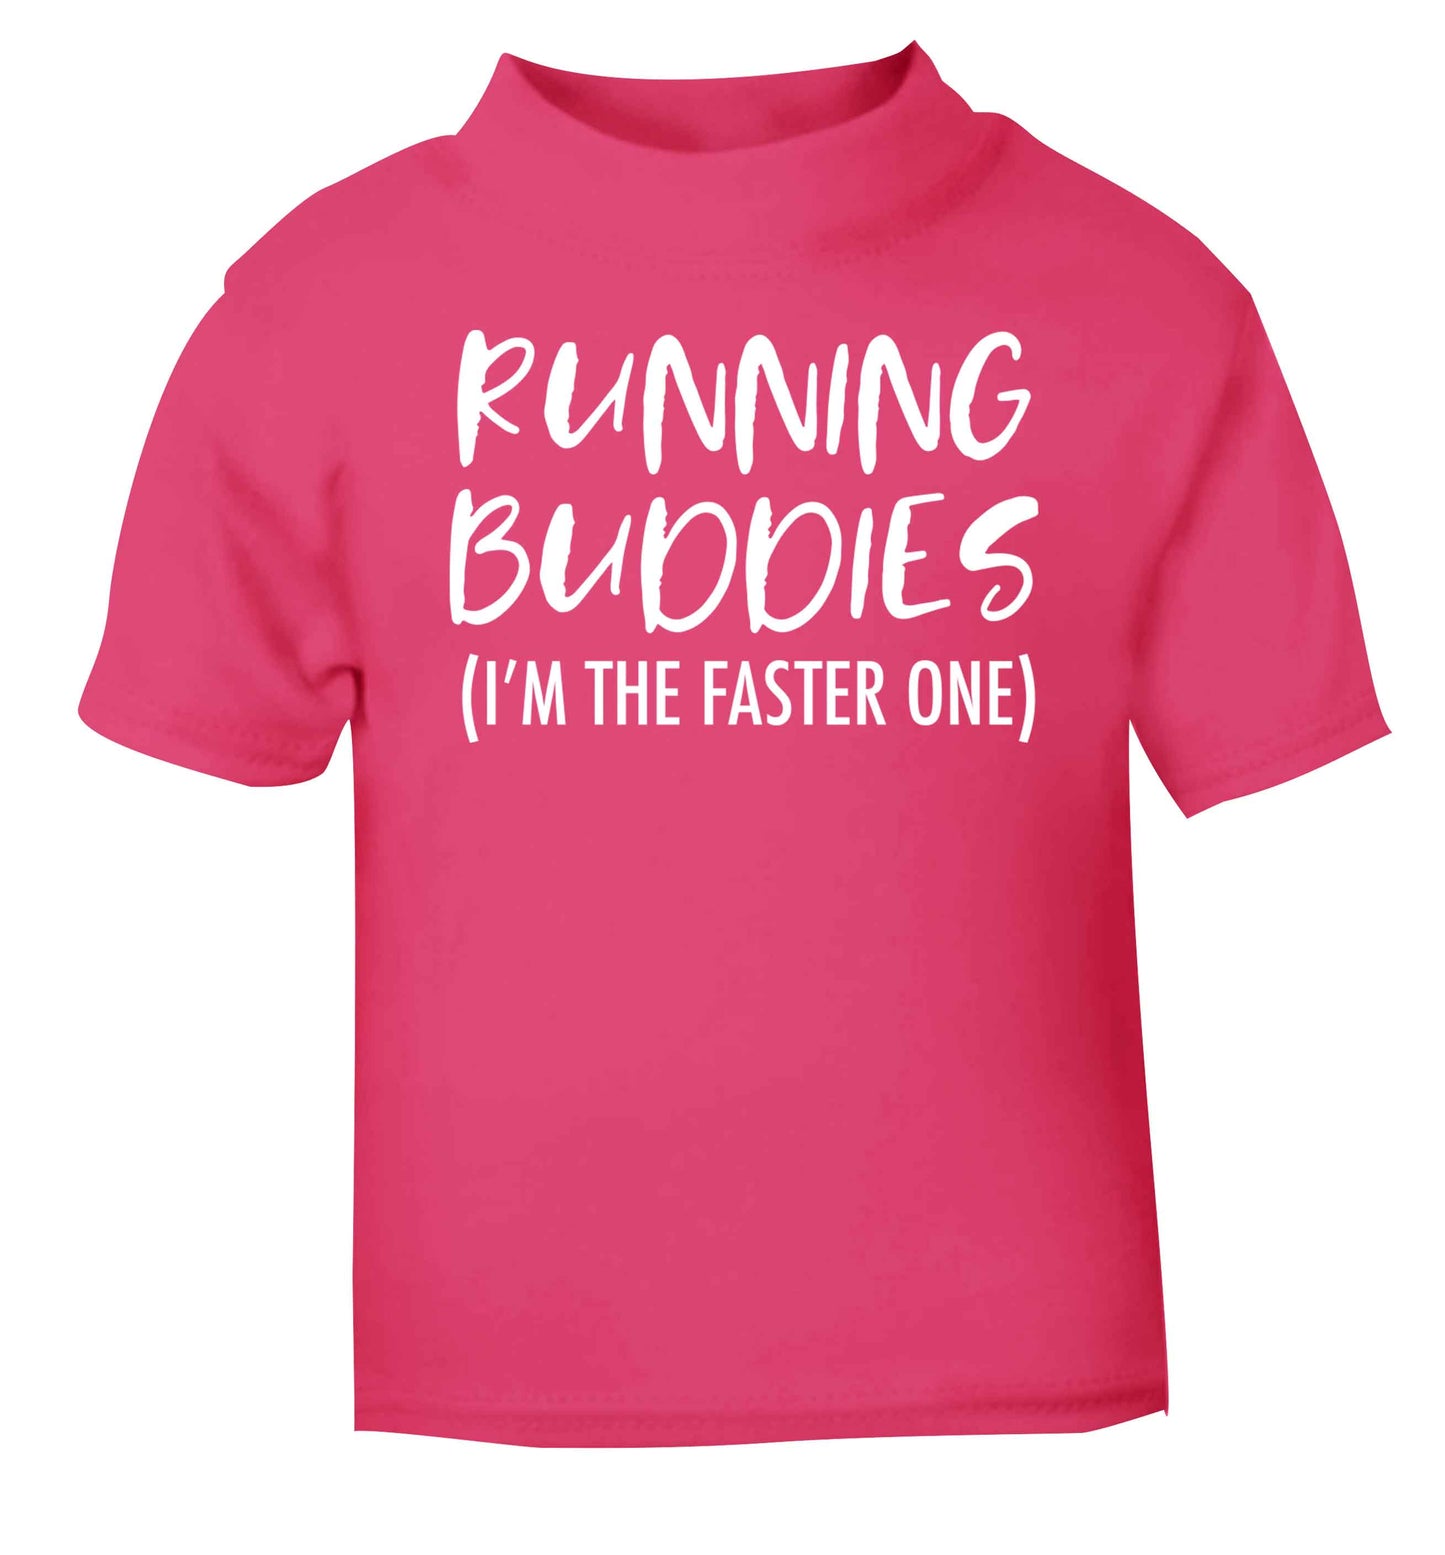 Running buddies (I'm the faster one) pink baby toddler Tshirt 2 Years